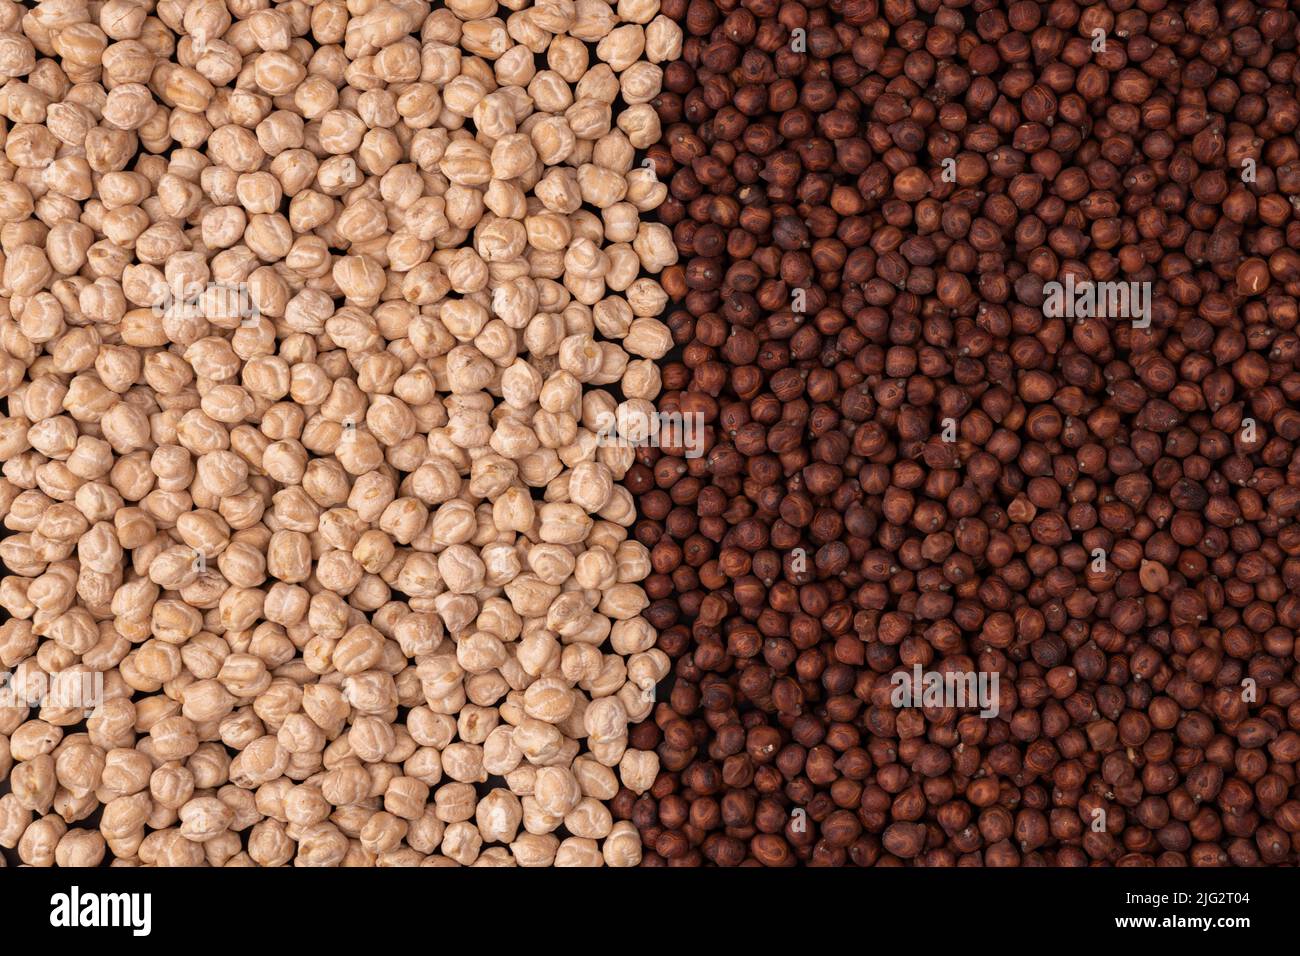 dark and white chickpeas, different types of legumes and cereals as background, top view, organic grains Stock Photo